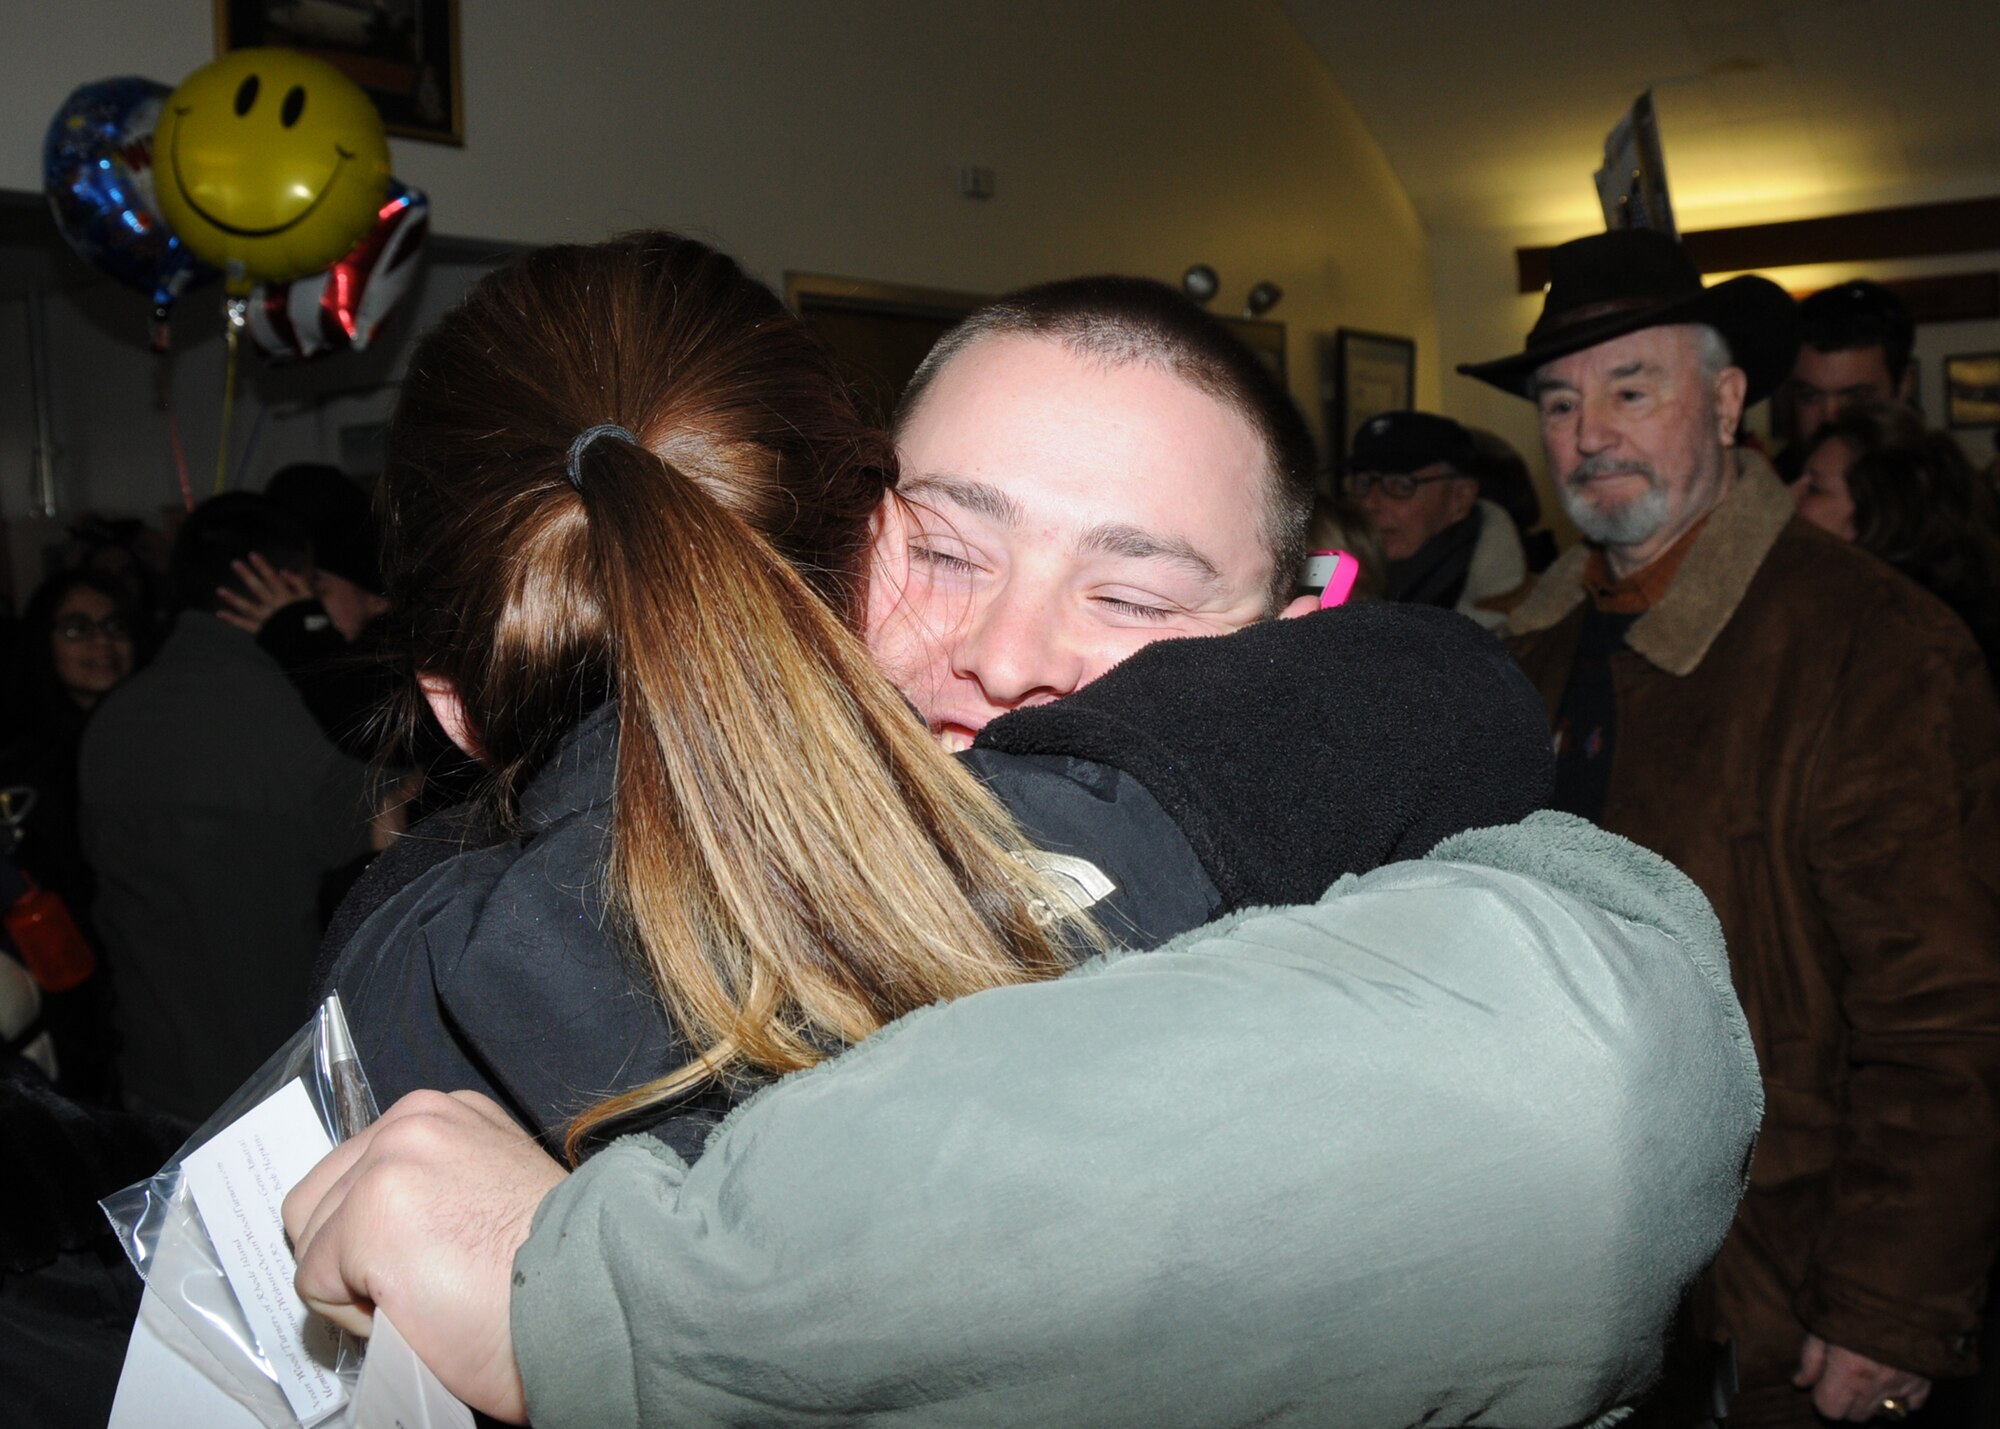 Excited families and friends greet their loved ones upon return from a deployment to Kuwait. Airmen from the 143d Airlift Wing Operations Group, Maintenance Group and Logistics Readiness Squadron were deployed in support of Operation Enduring Freedom. National Guard Photo by Master Sgt John McDonald (RELEASED)